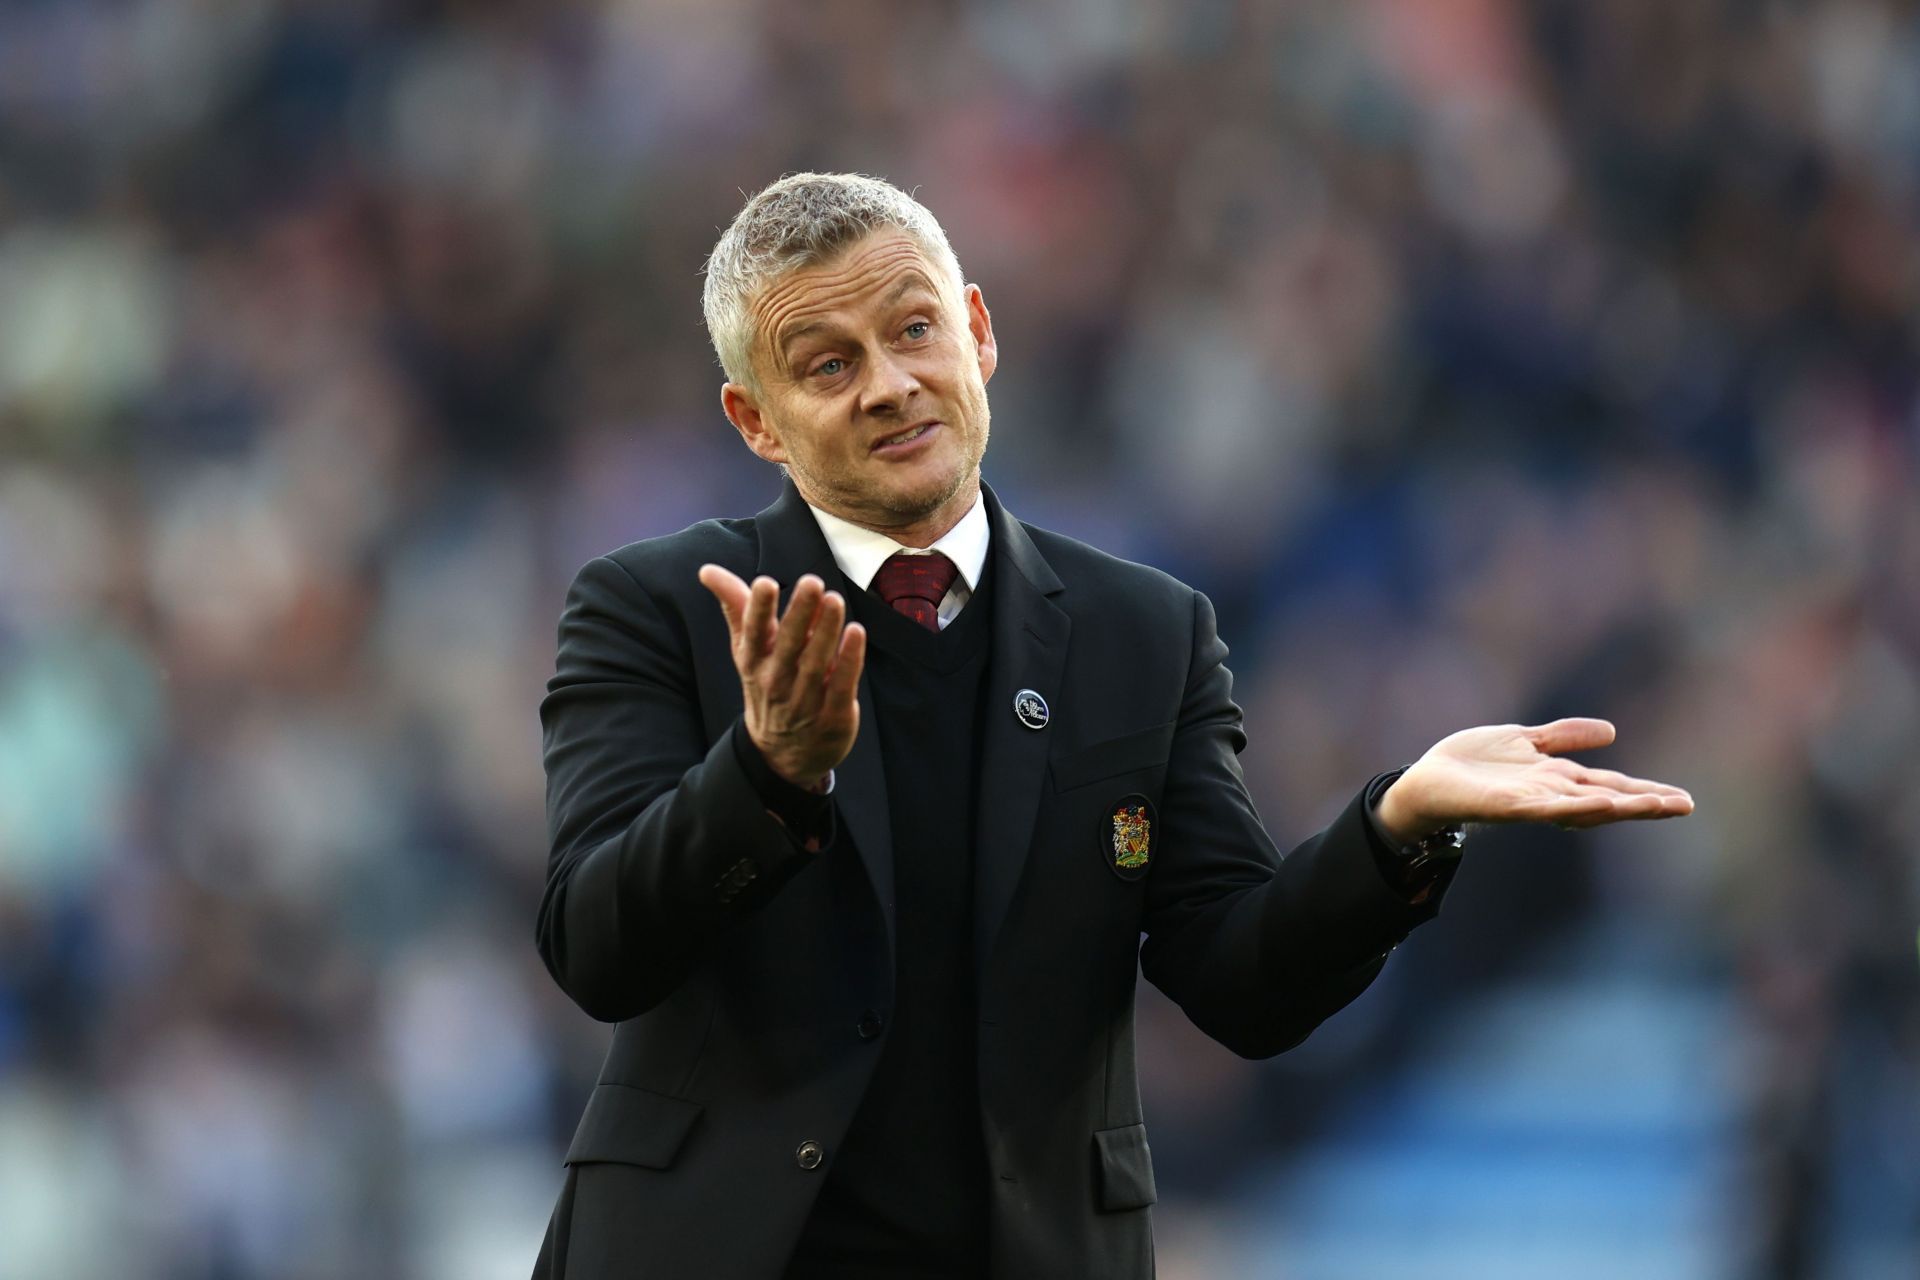 Ole Gunnar Solskjaer has explained the shortcomings of his midfield against Leicester City.